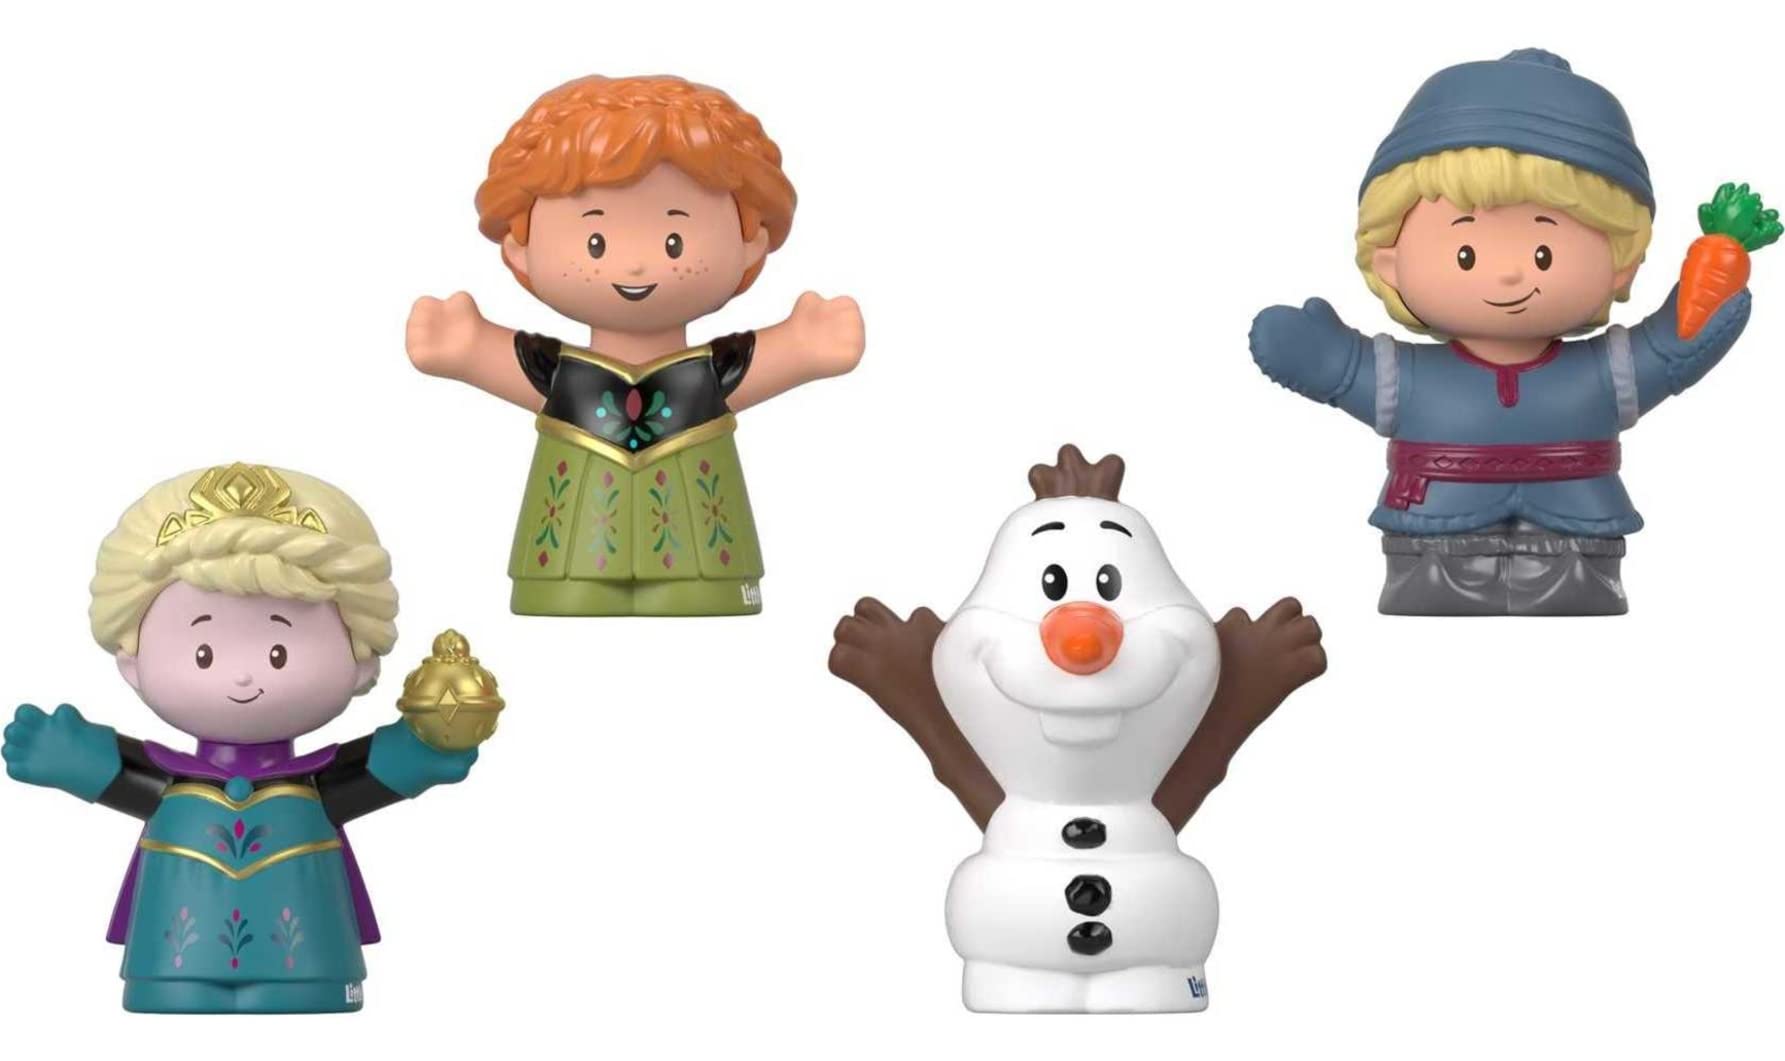 Disney Frozen Elsa & Friends Little People Figure Set With Anna Kristoff & Olaf For Toddler Pretend Play Ages 18+ Months